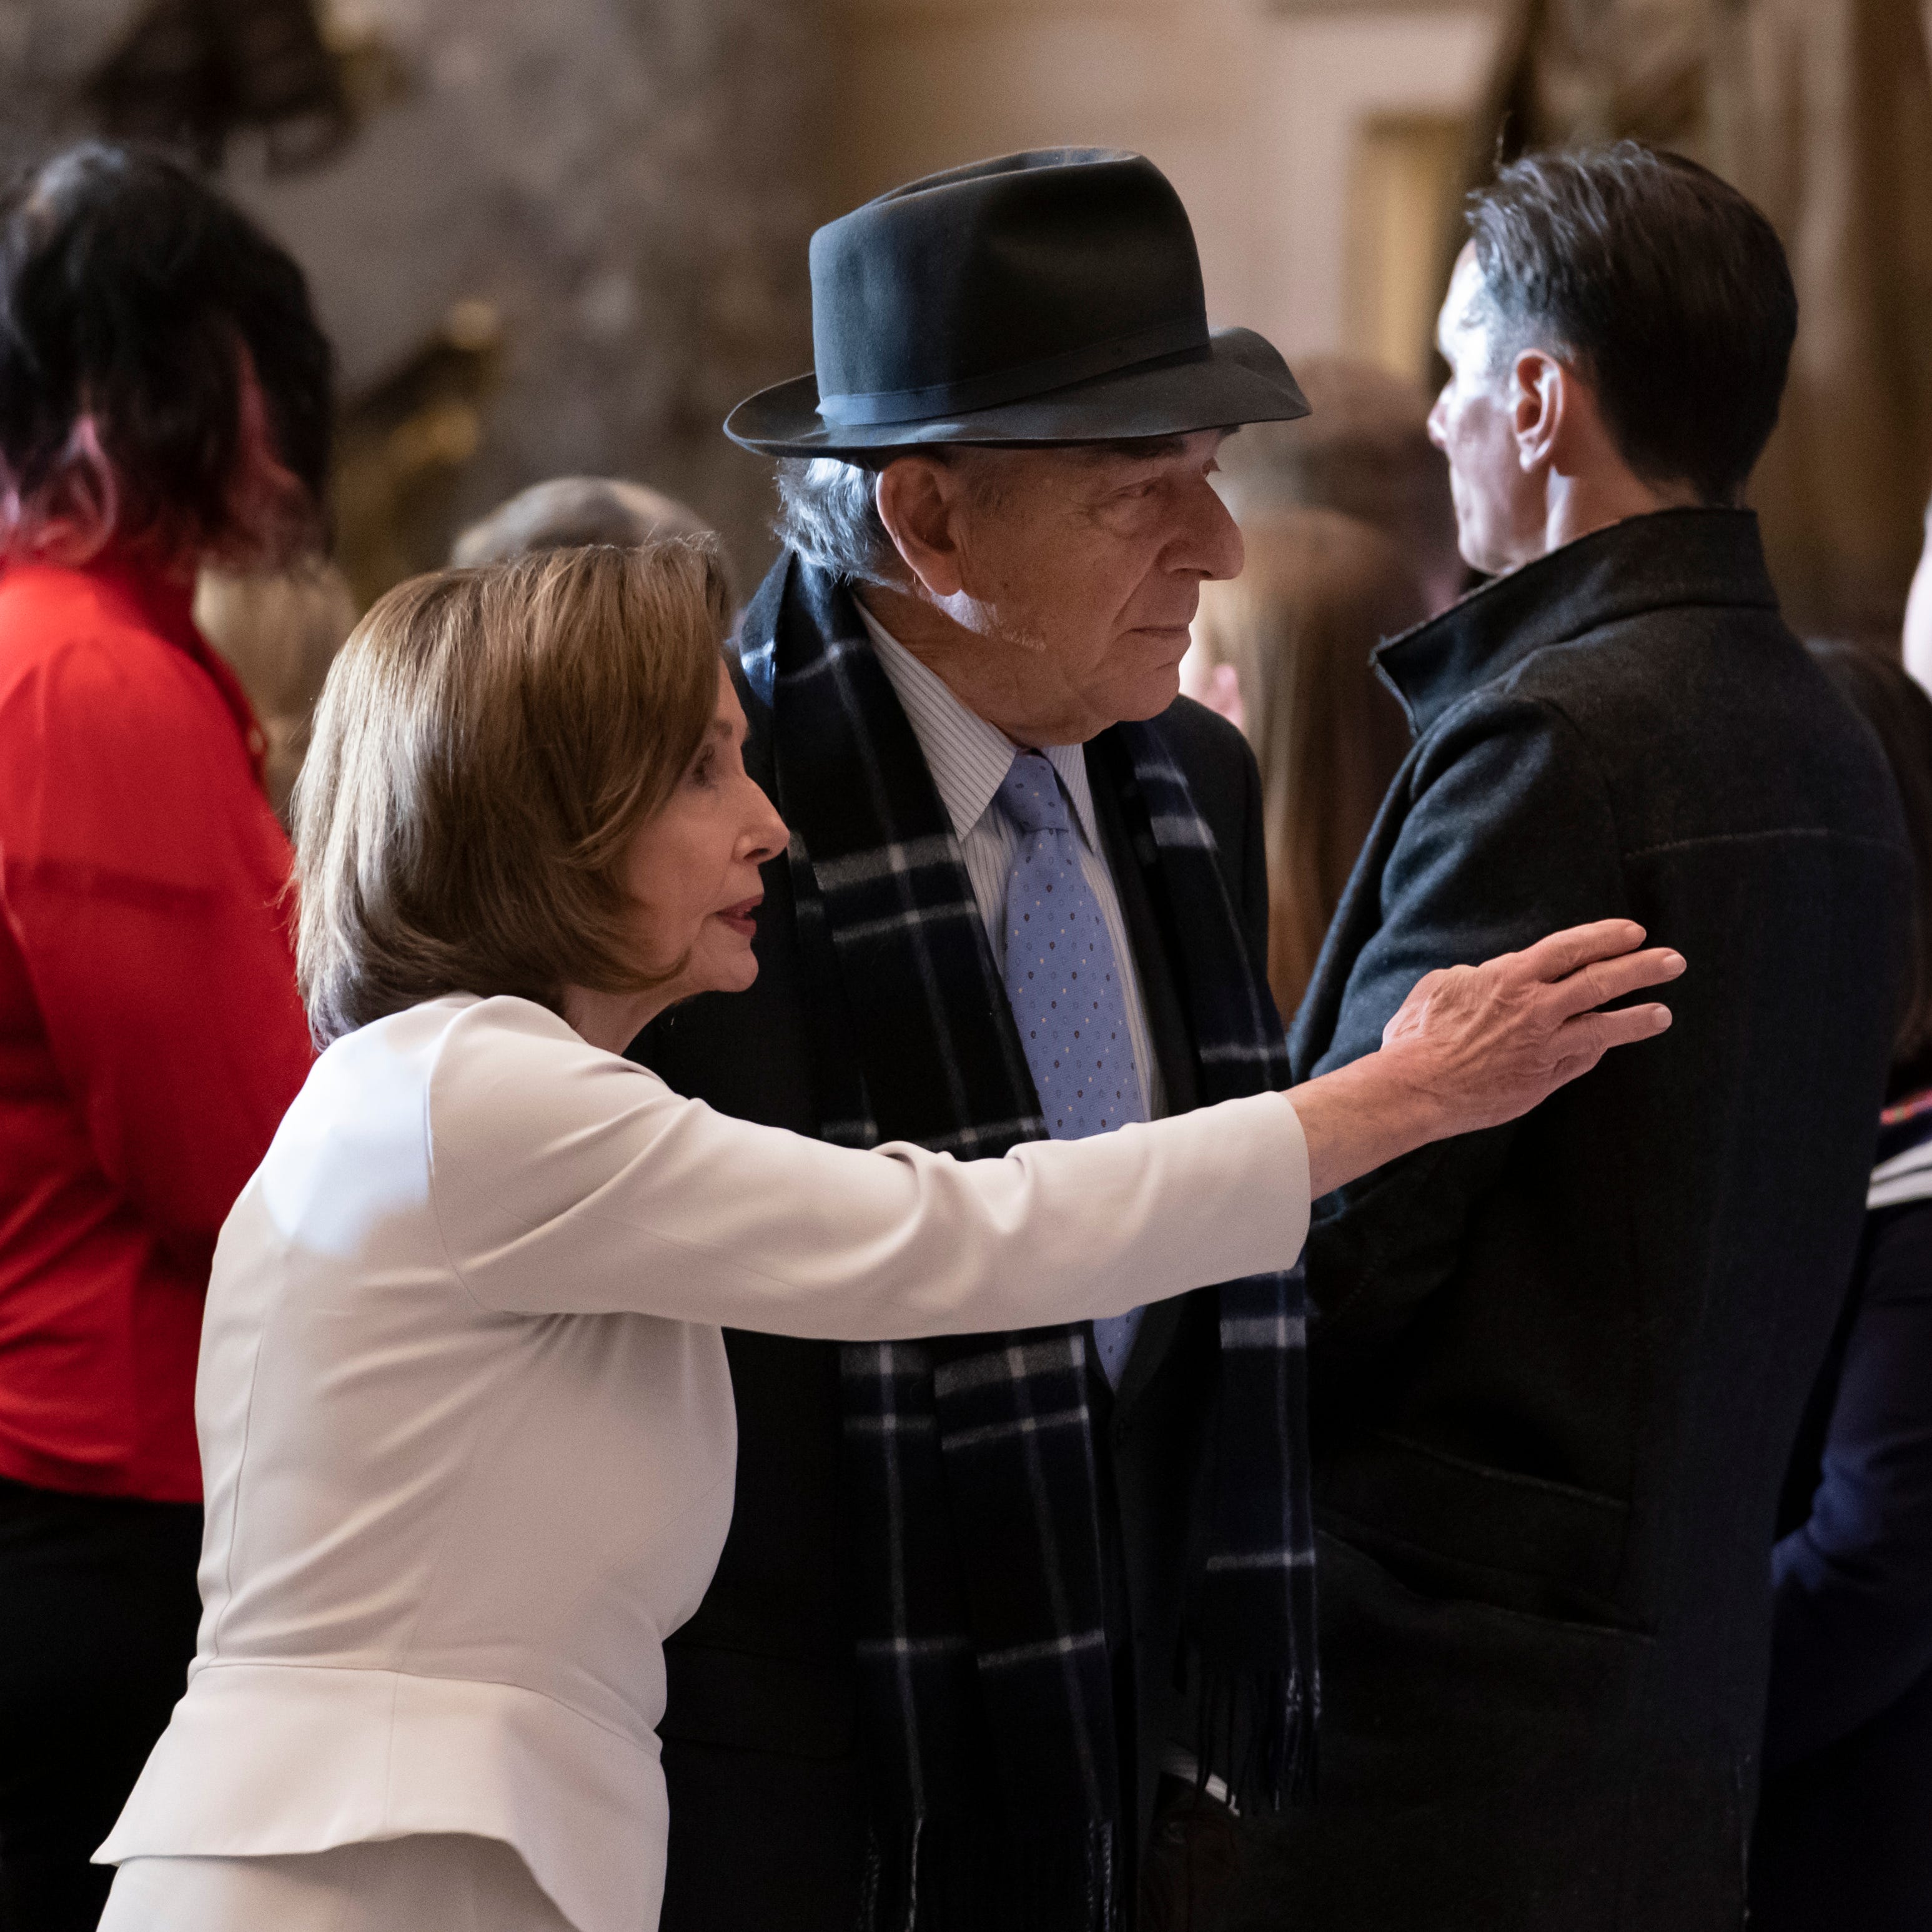 Speaker of the House Nancy Pelosi is joined by her husband Paul Pelosi on Wednesday as they attend her portrait unveiling ceremony in Statuary Hall at the Capitol in Washington.